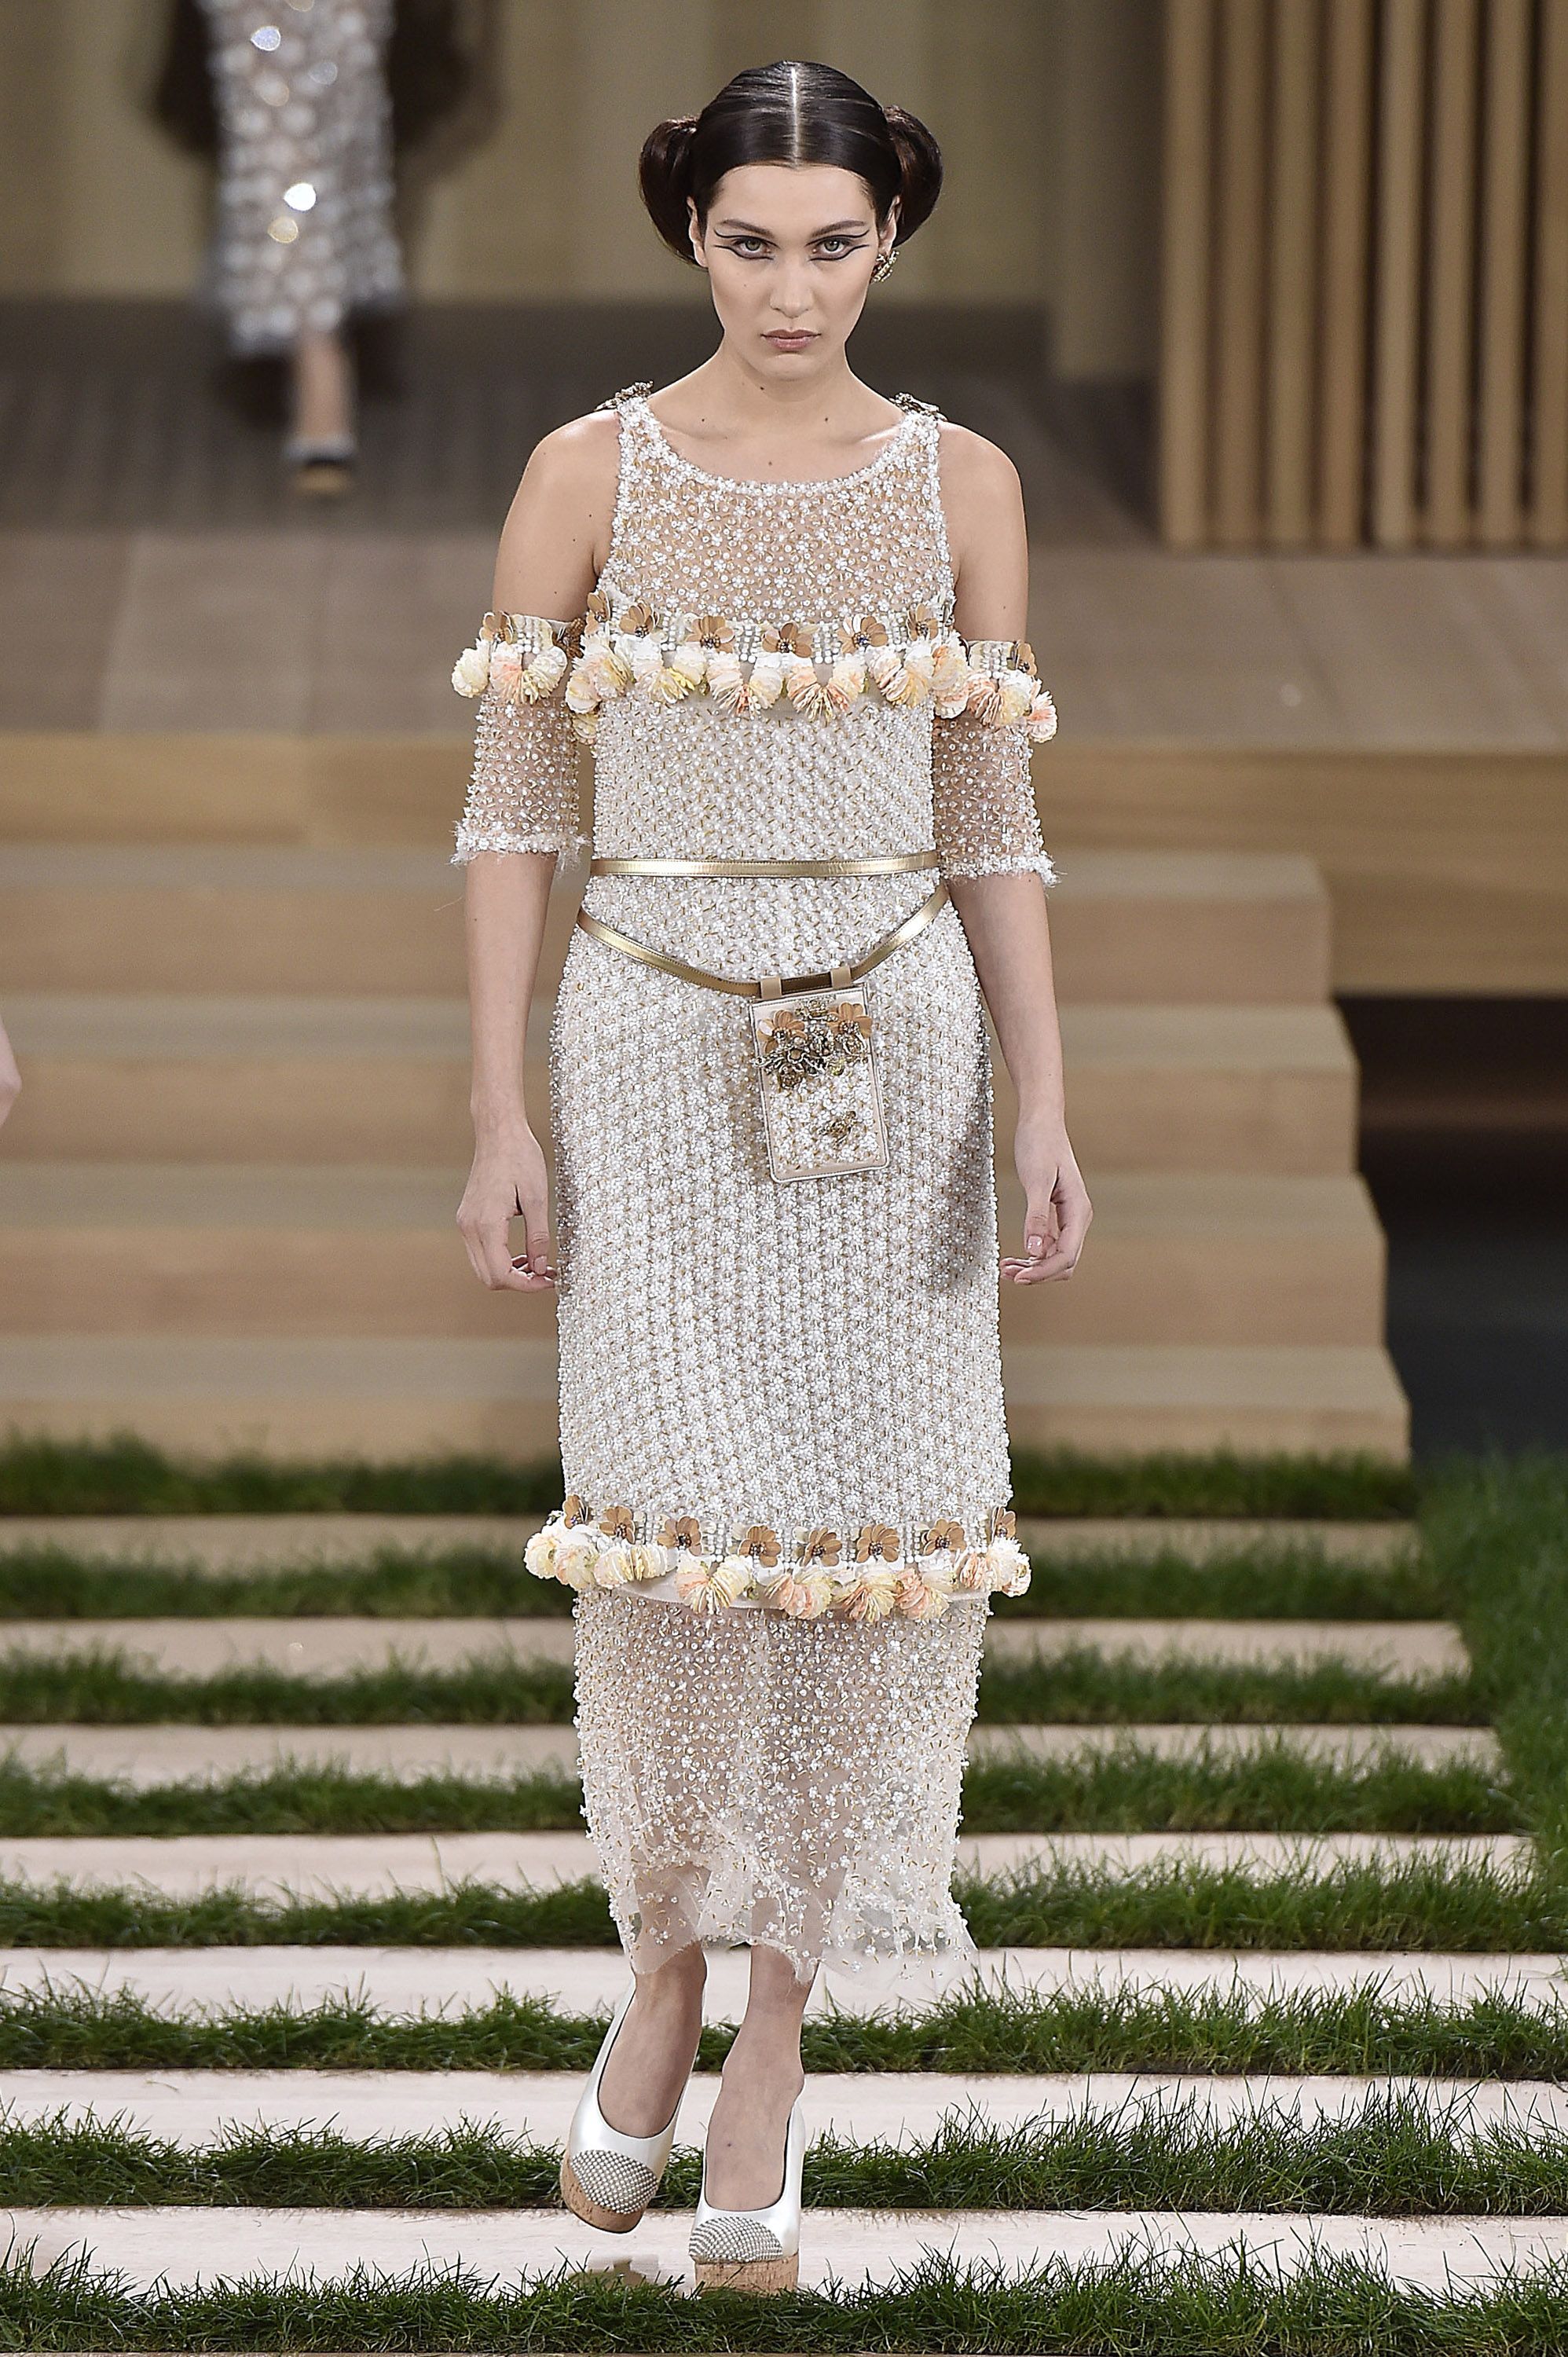 Chanel Spring/Summer 2019 collection News Photo - Getty Images